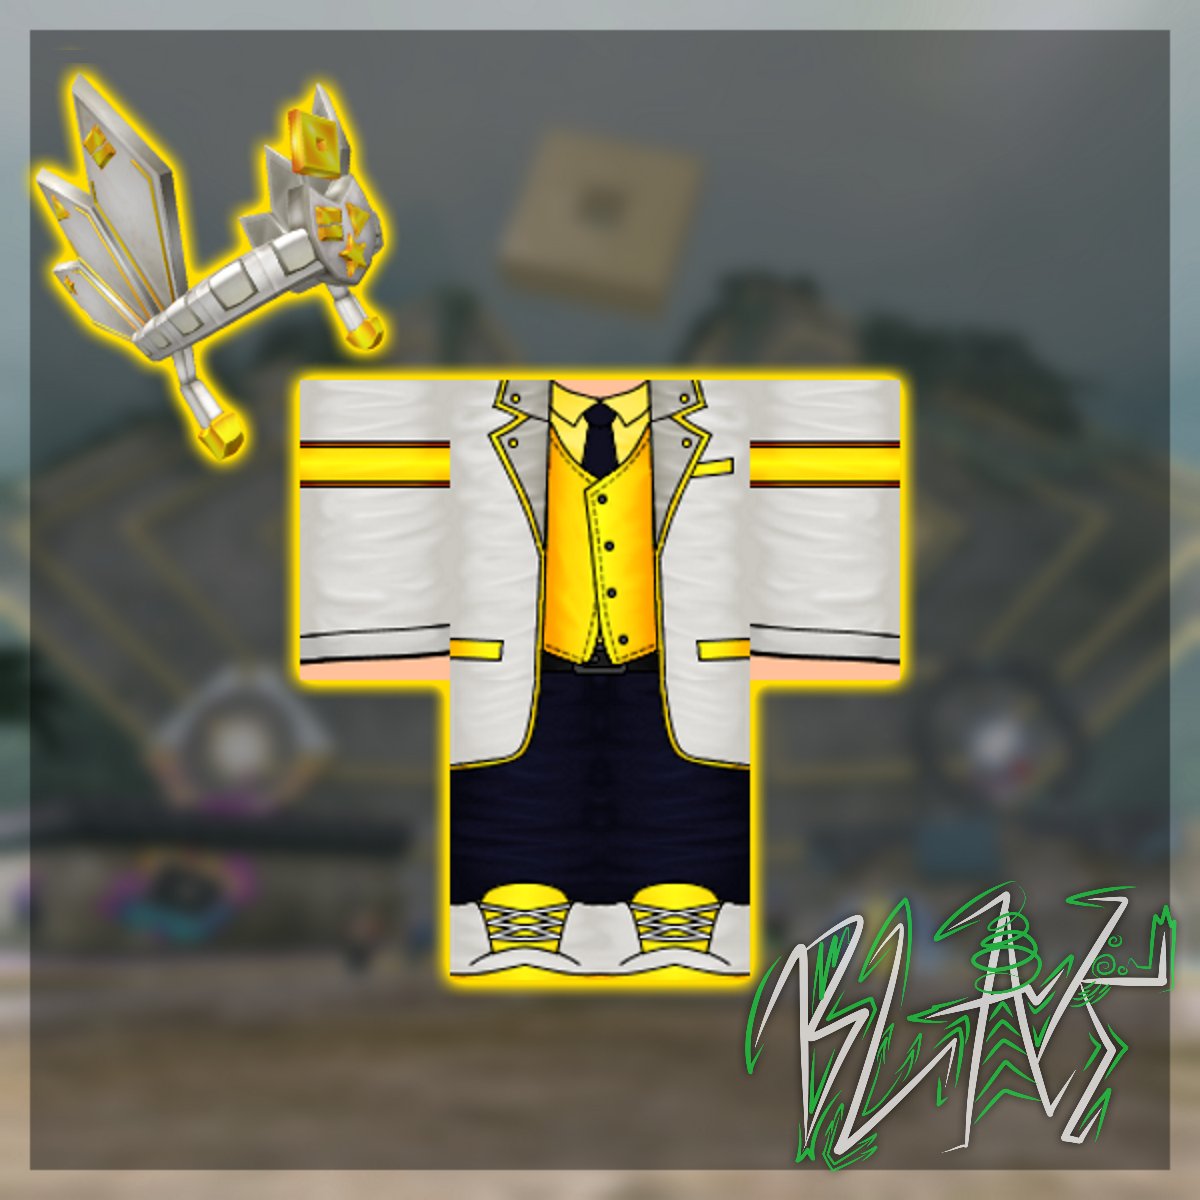 Greenblak On Twitter Made A Matching Suit For The Valkyrie Of The Metaverse Expect More Outfits Coming Soon Shirt Https T Co Ymcdjpqjwz Pants Https T Co 6xwbp1eish Blakdesigns Roblox Robloxclothing Desenvolvedorroblox Robloxclothes Https - roblox yoshi shirt